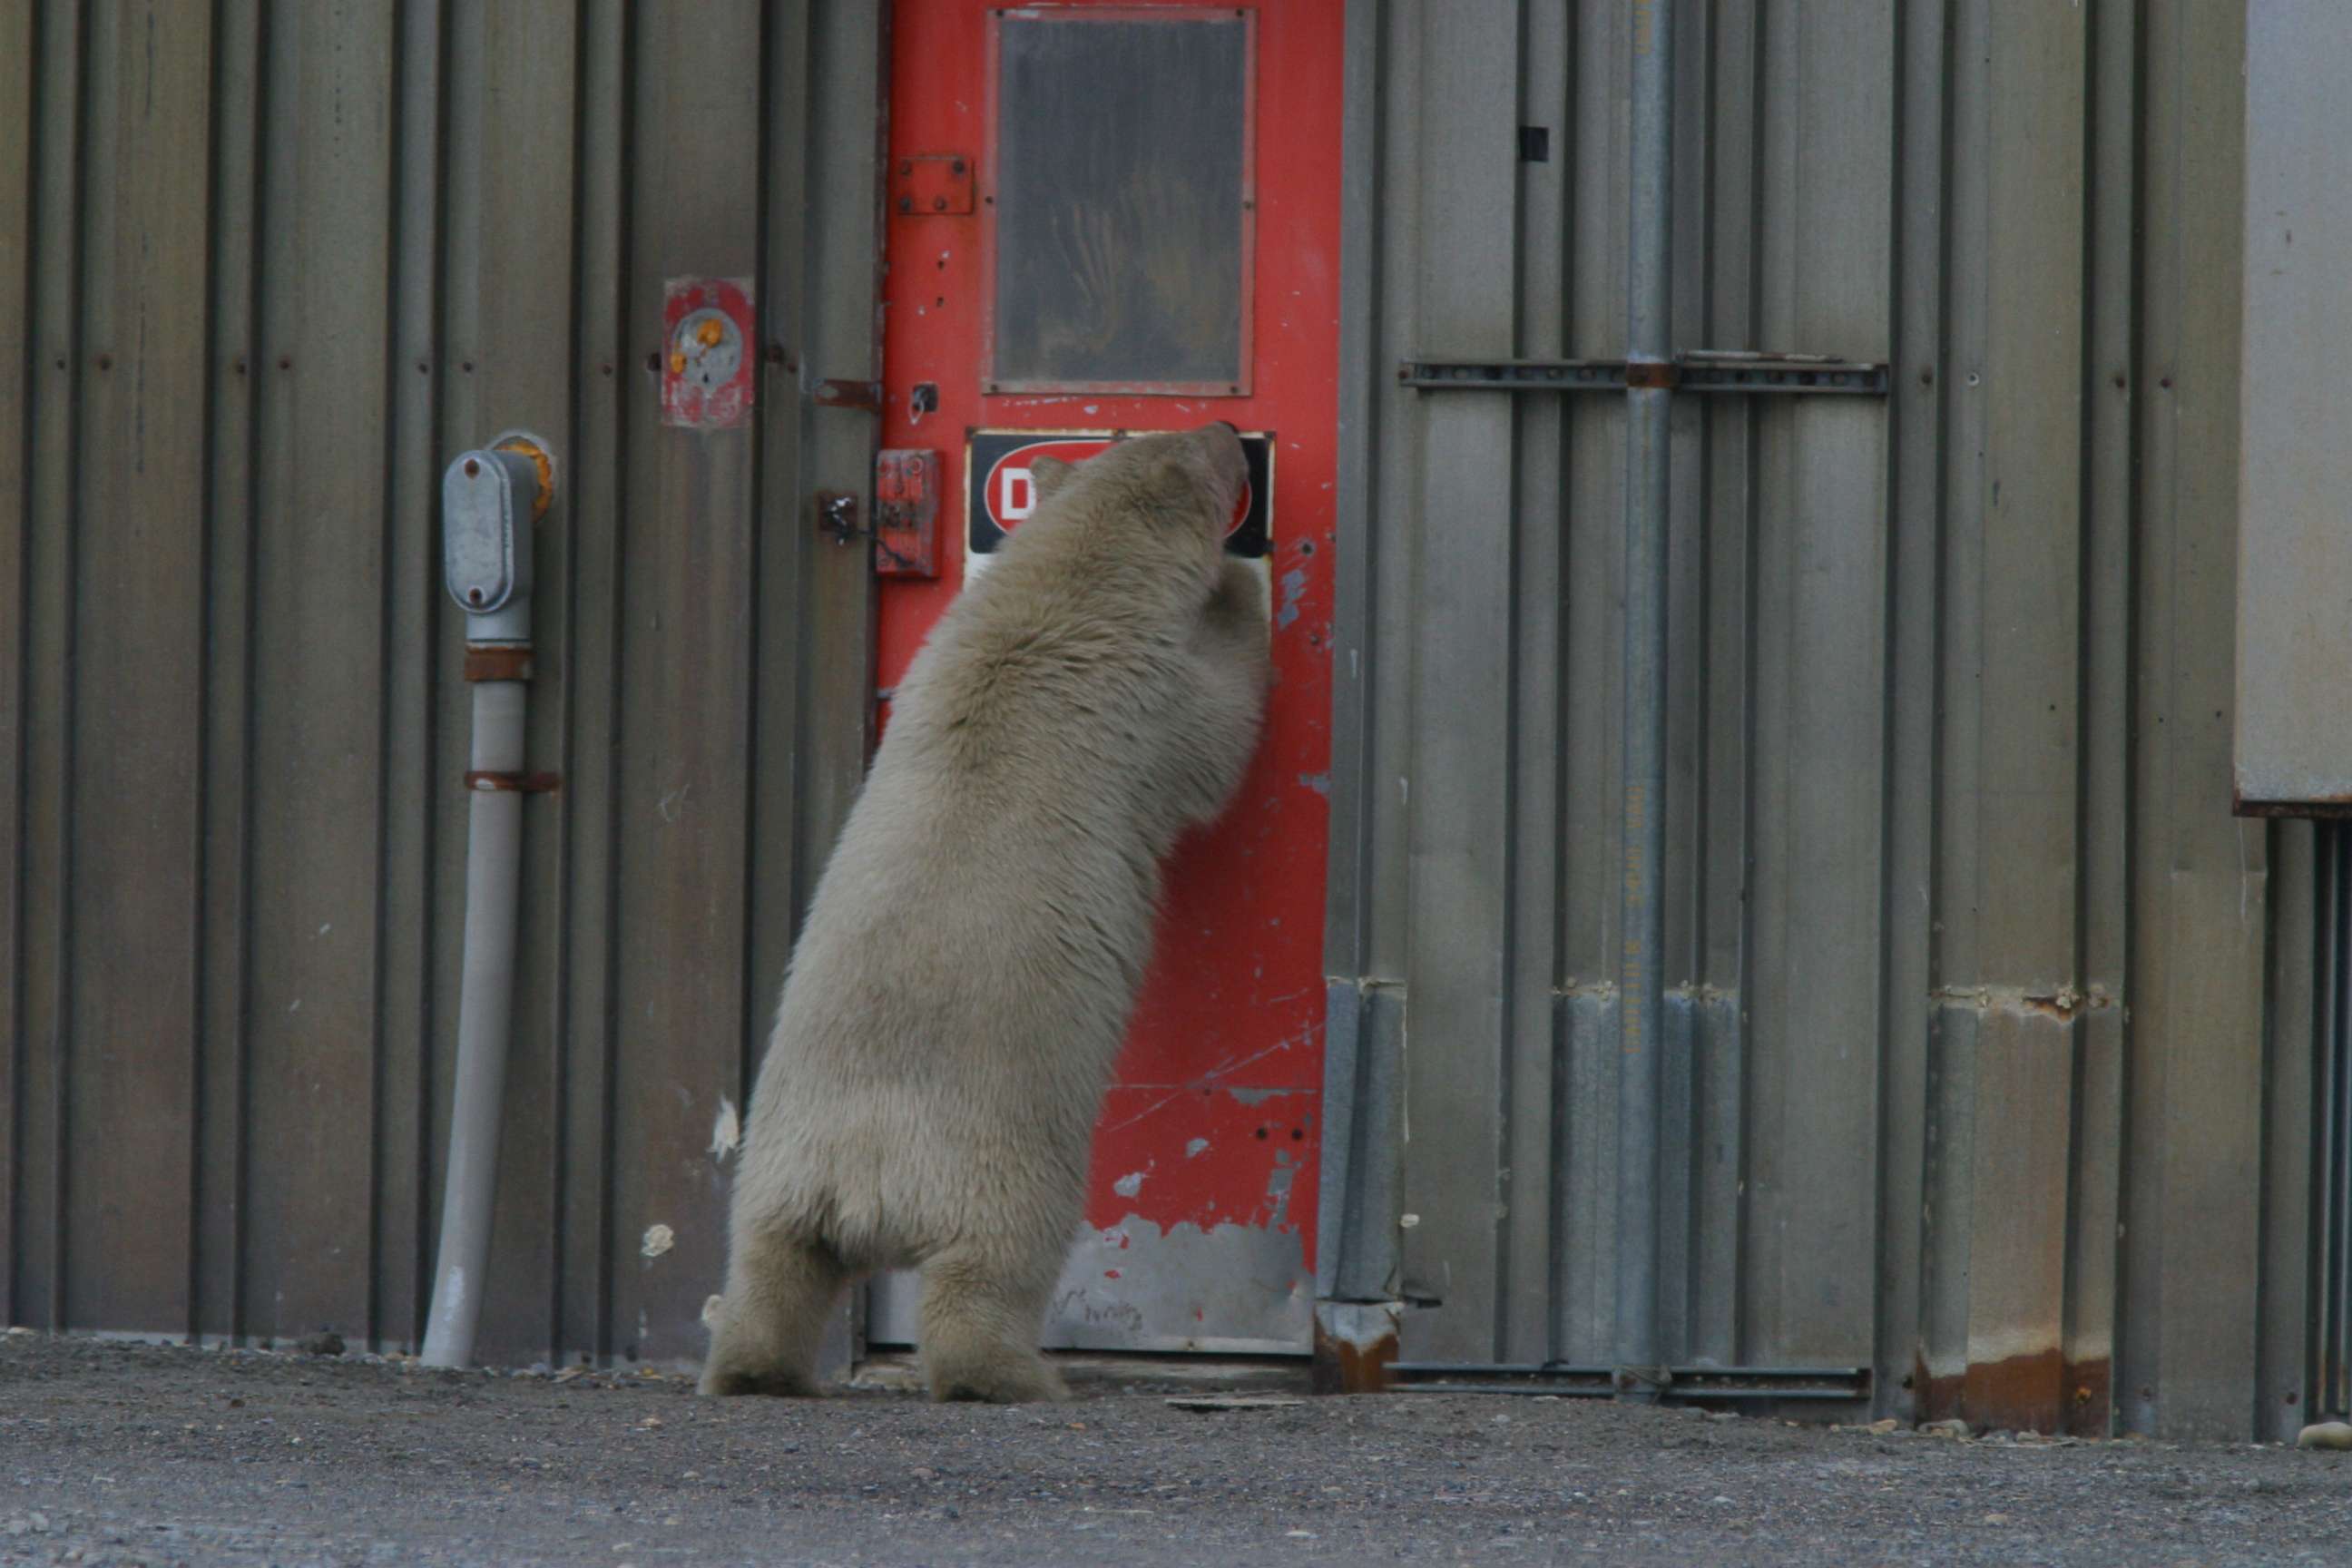 Polar bears wandering into Kaktovik proved to be such a problem that the town started a polar bear patrol.